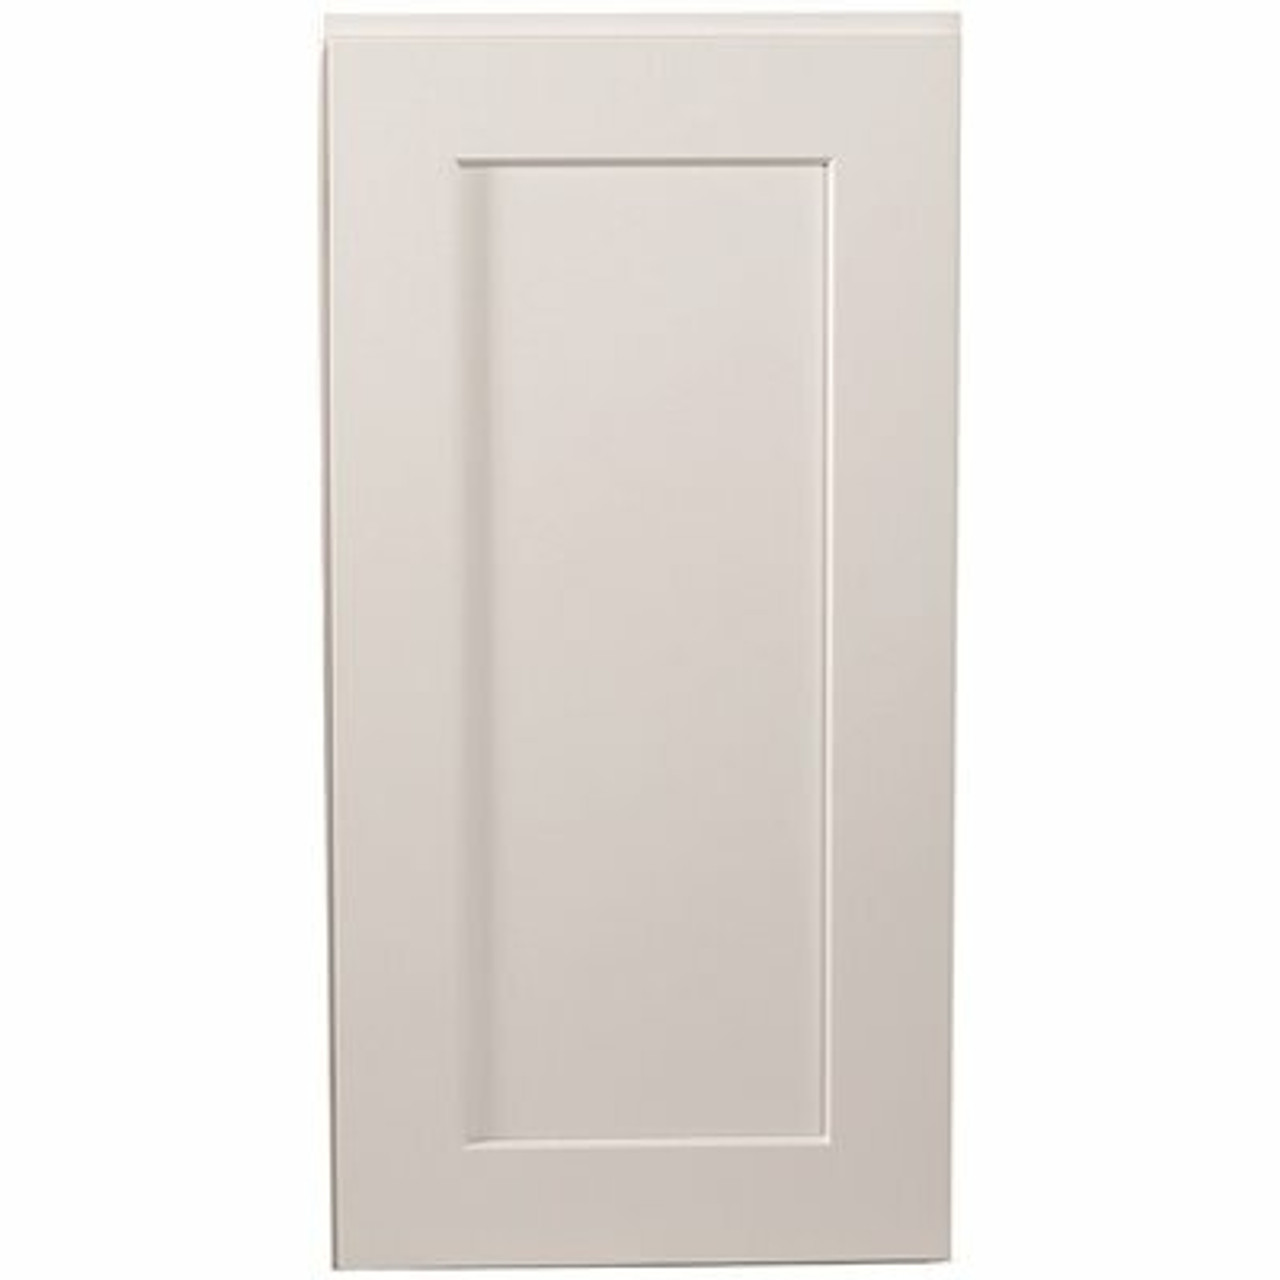 Design House Brookings Plywood Ready To Assemble Shaker 15X30X12 In. 1-Door Wall Kitchen Cabinet In White